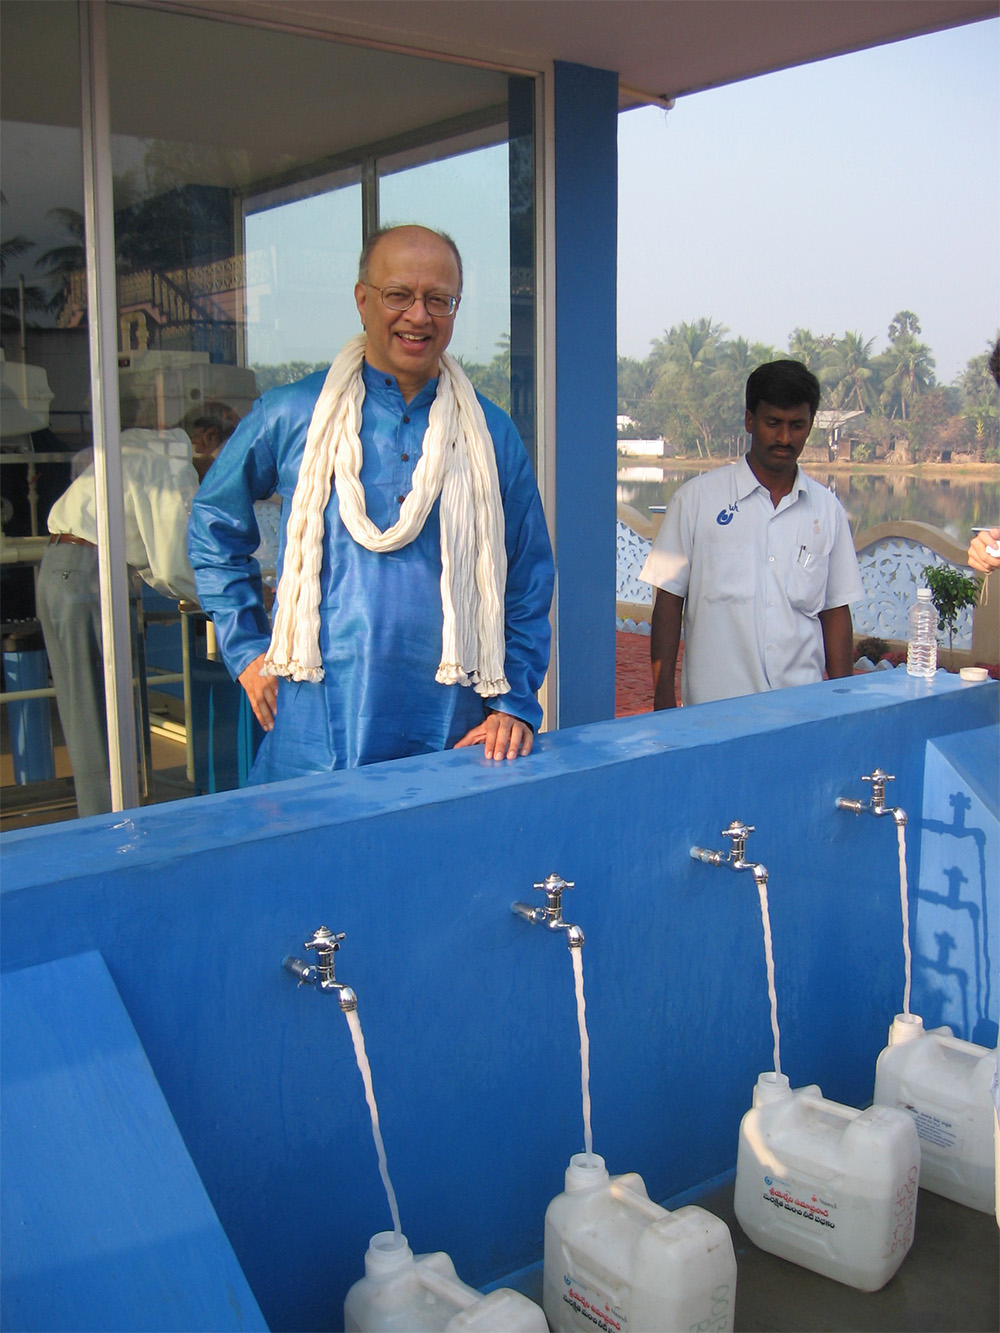 Ashok Gadgil at a safe drinking water station in Mudinepalli, India, built and operated by licensee WaterHealth International 2007. (Credit: Ashok Gadgil)